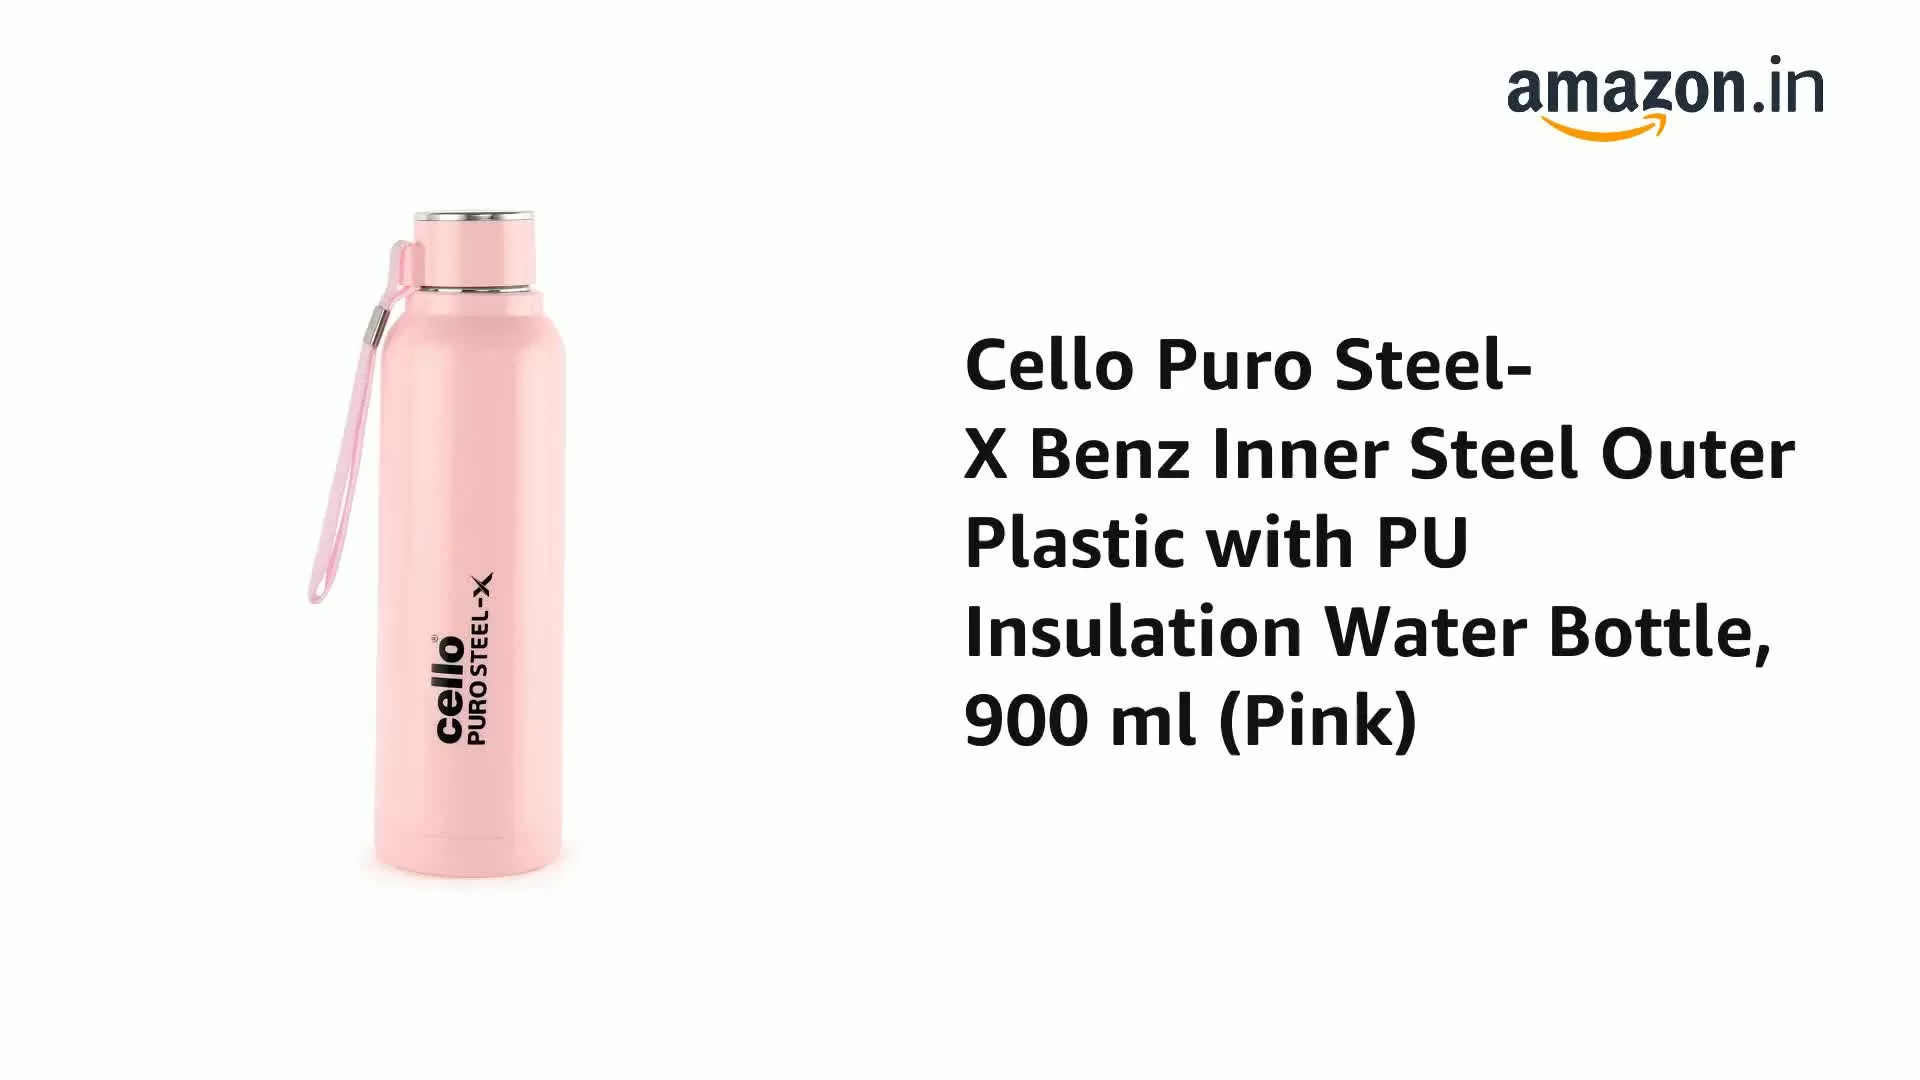 Cello Puro Steel-X Benz Water Bottle with Inner Steel and Outer Plastic 900 ml (Pink), 2 image